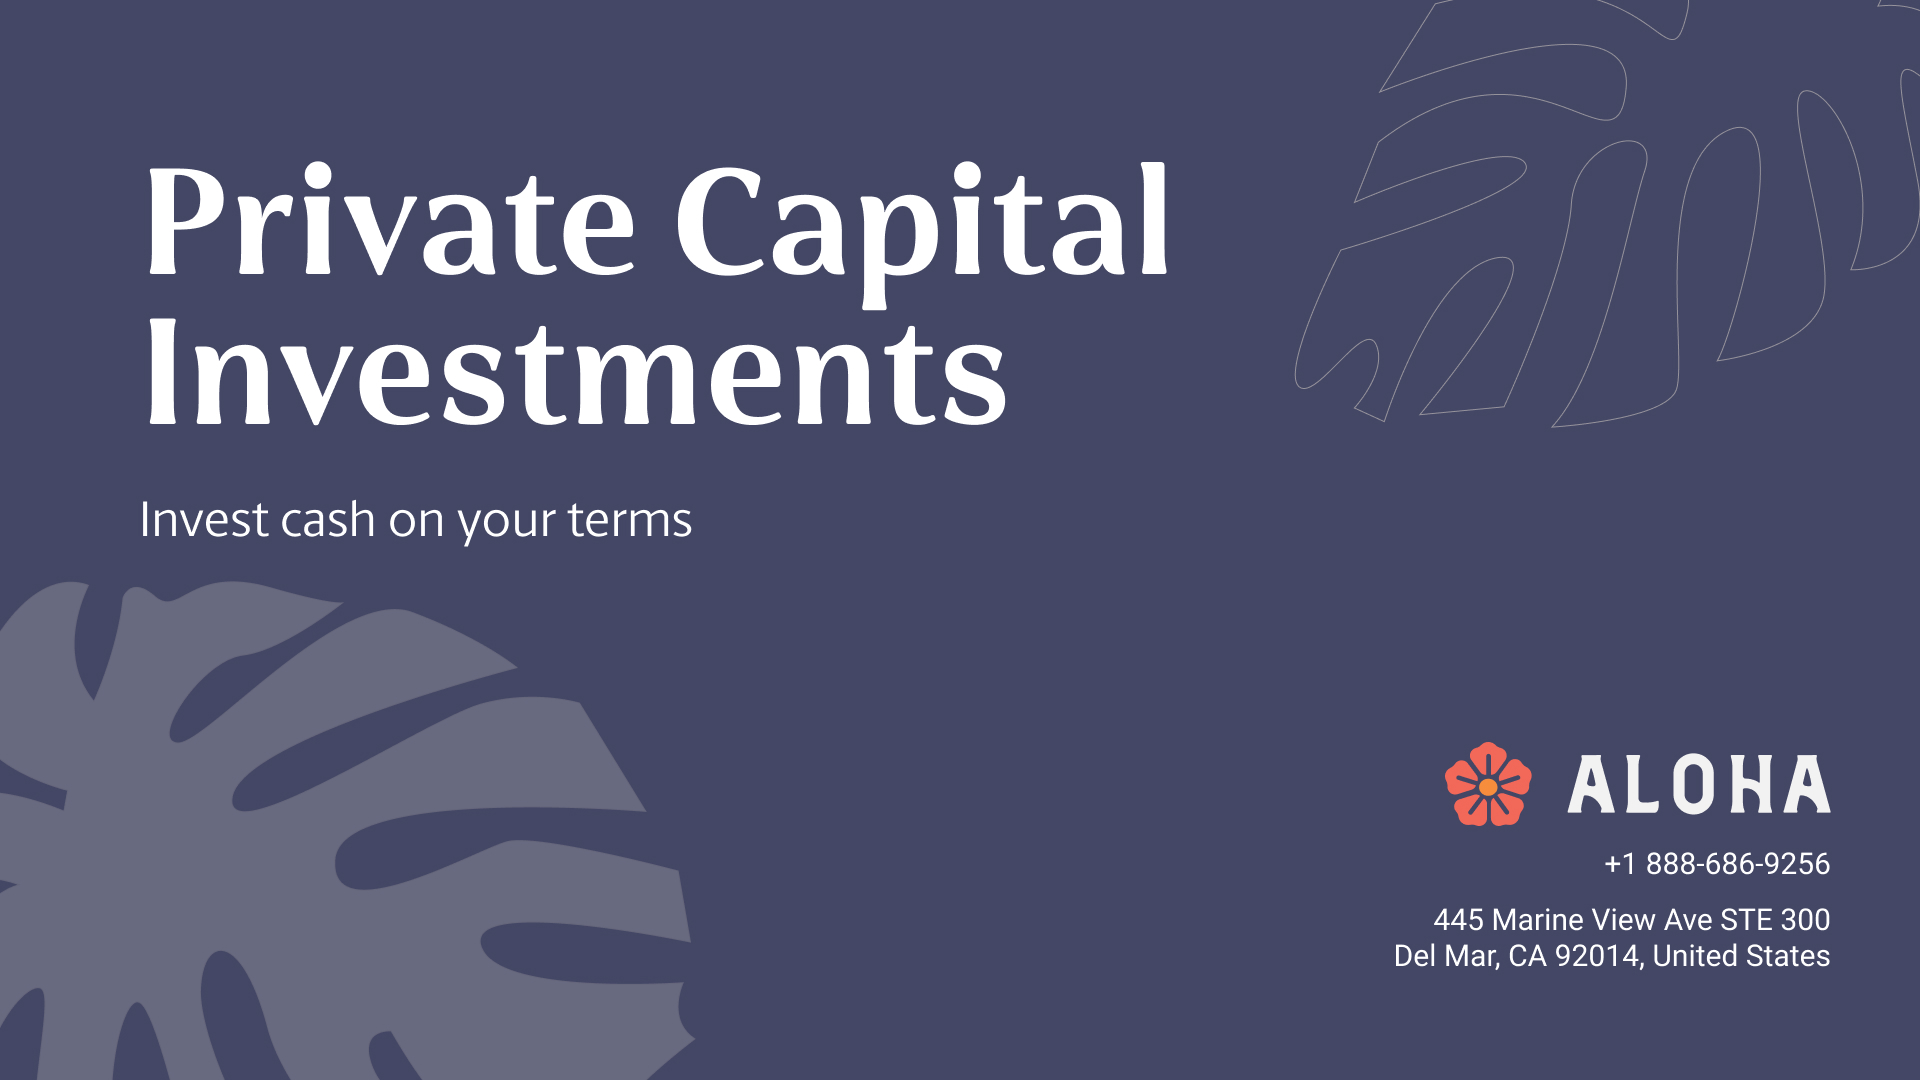 / Alternative Investments for Sophisticated Investors